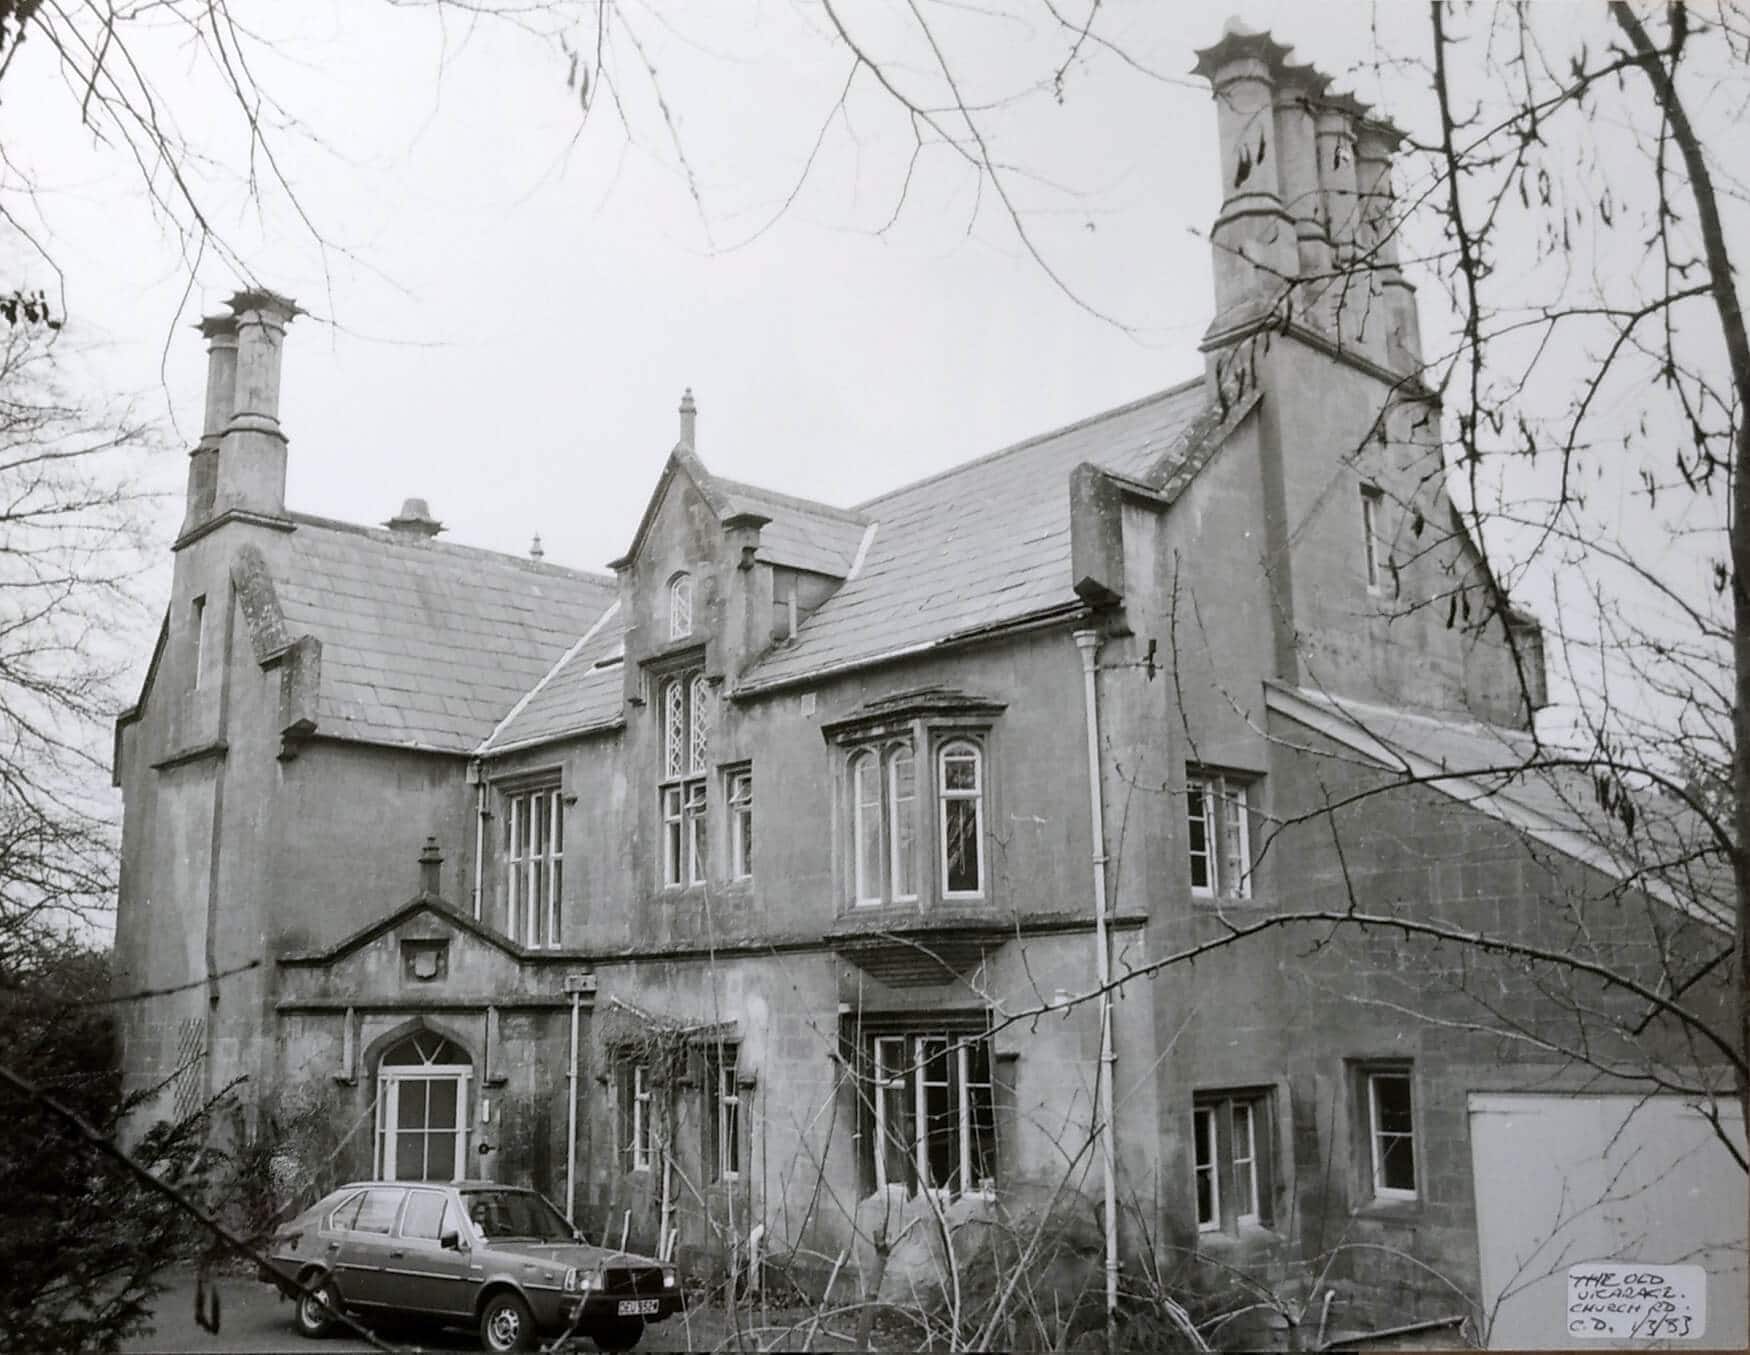 4 - BC8811229 Bath City Council Planning Department. Conservation Grant file for The Old Vicarage, Church Road, Combe Down, 15 Feb 1983-13 Sep 1983